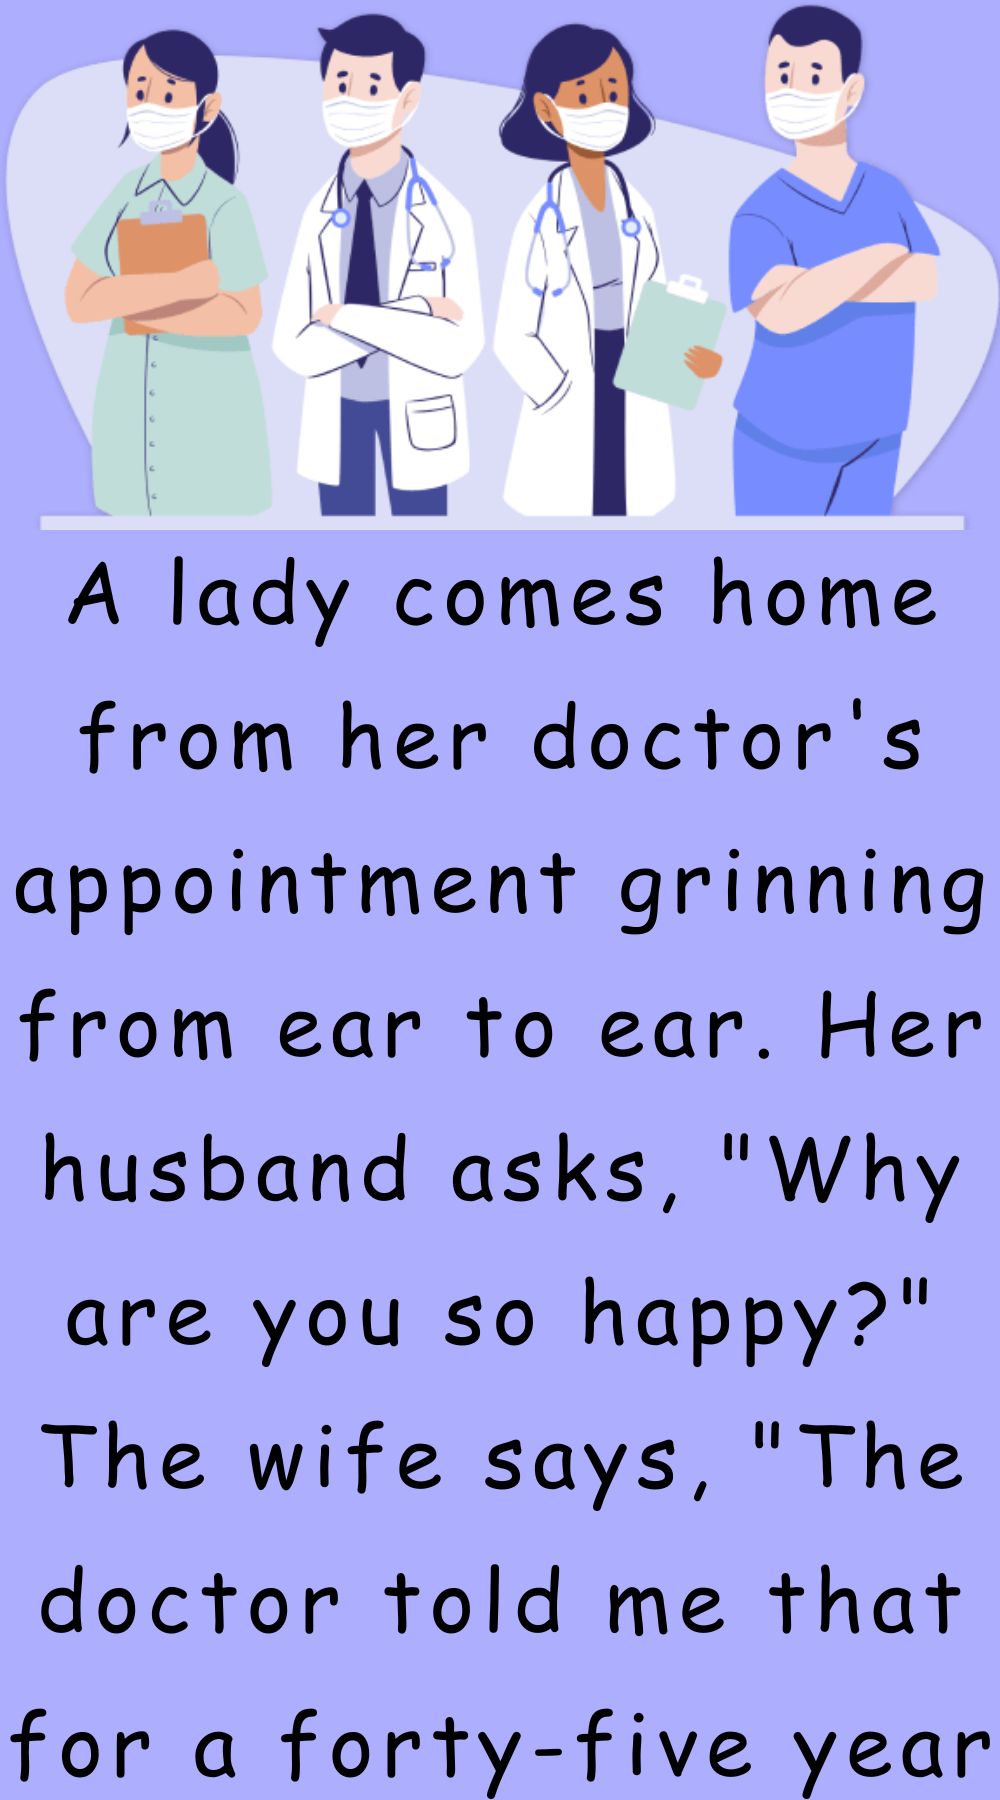 A lady comes home from her doctor's appointment